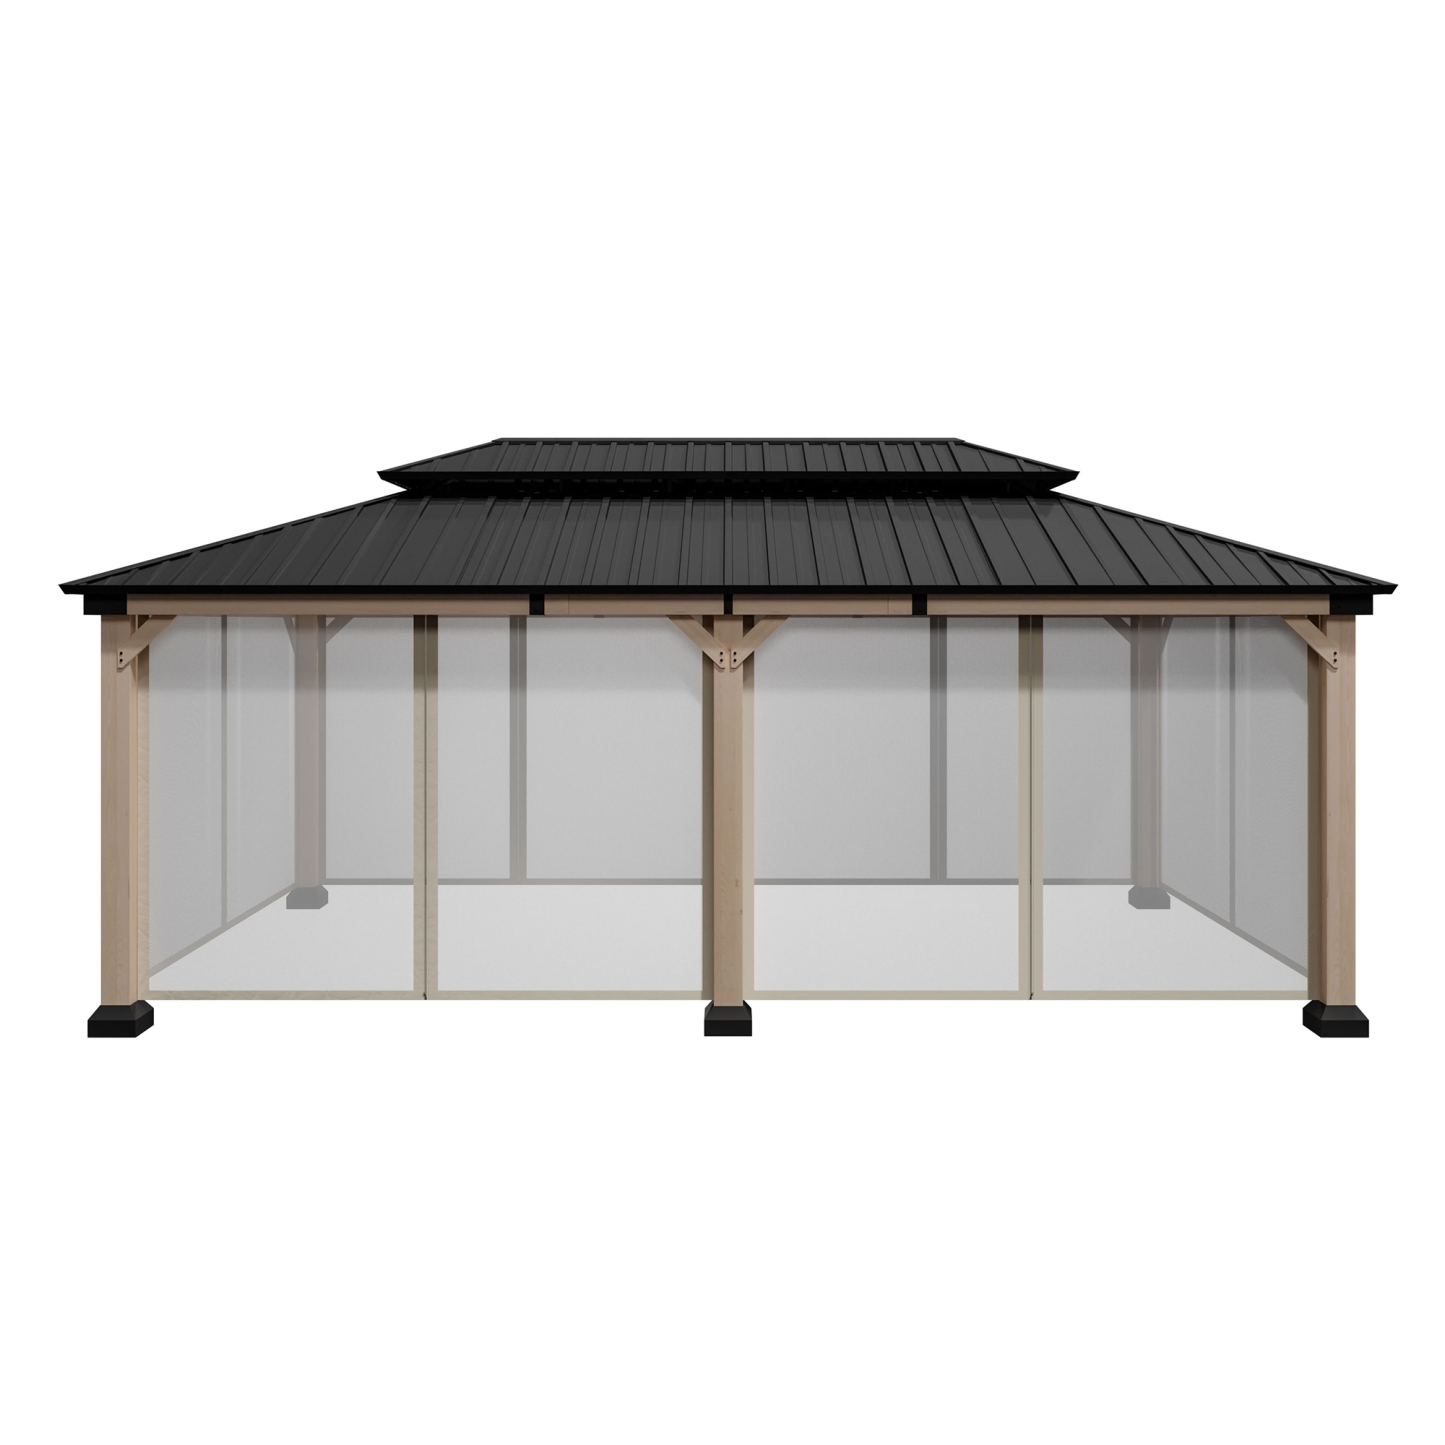 12 ft. x 20 ft. Outdoor Fir Solid Wood Frame Patio Gazebo Canopy Tent Shelter with Galvanized Steel Hardtop Pavilion-Mondawe